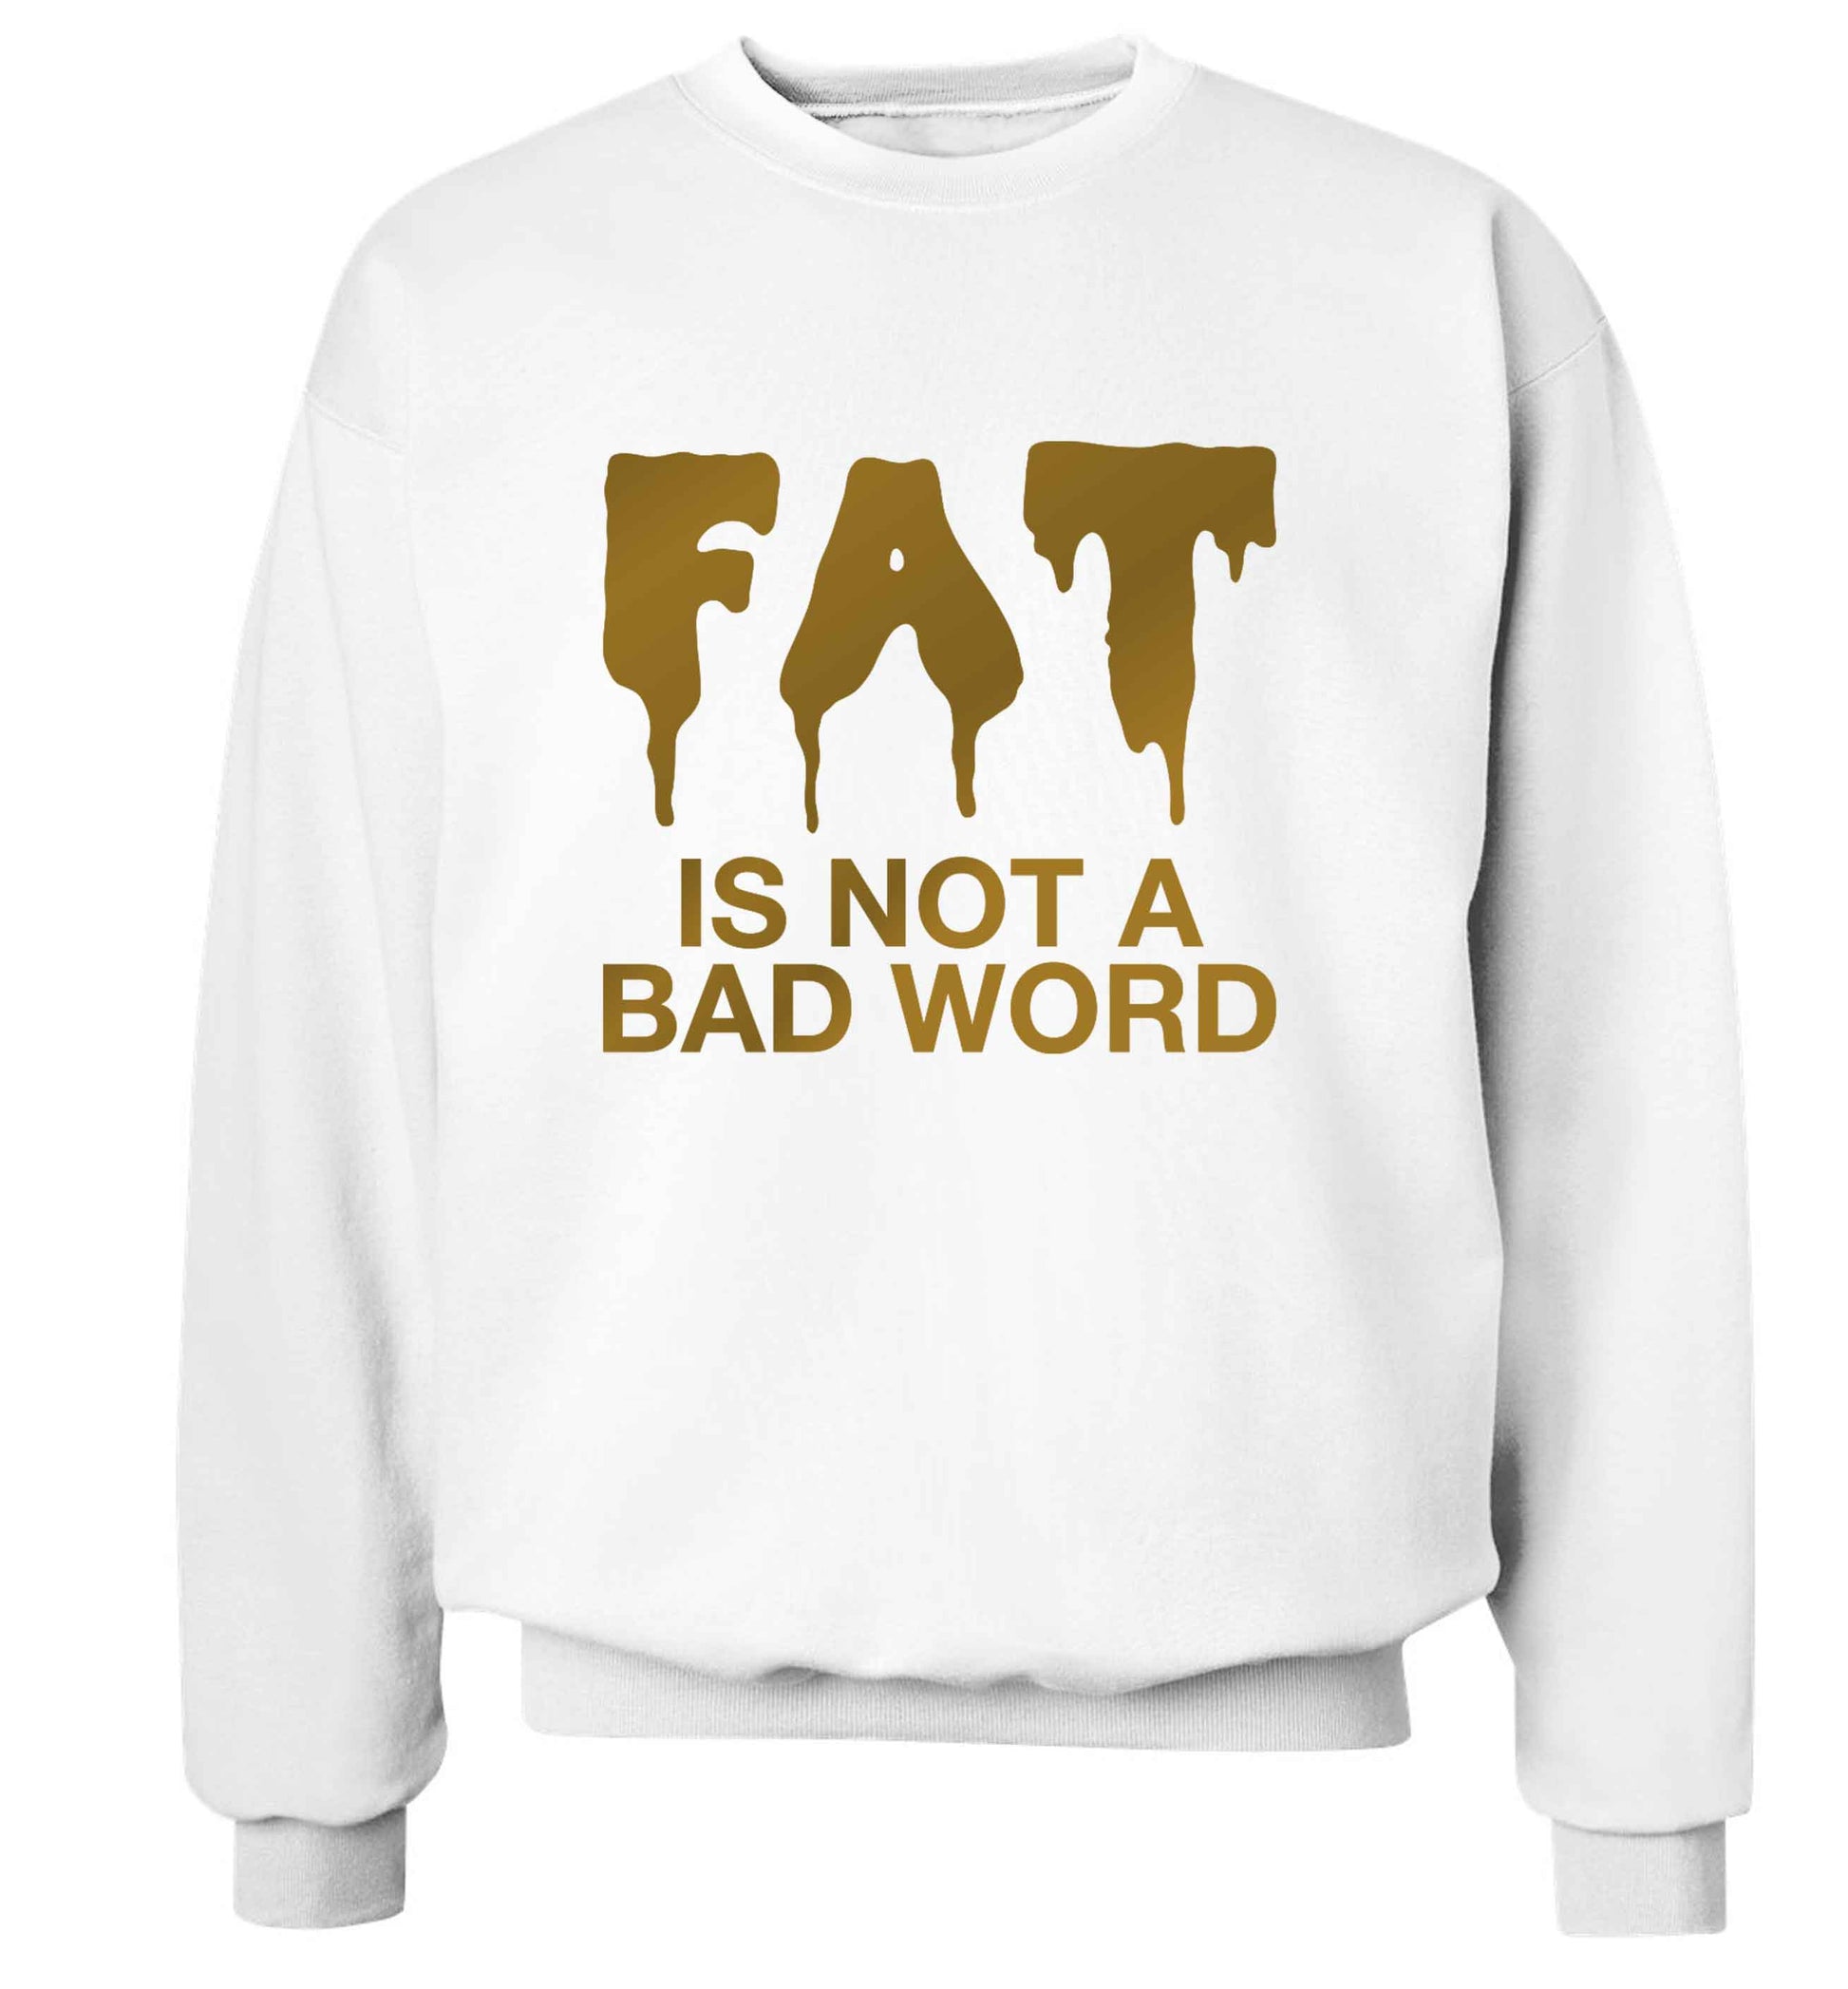 Fat is not a bad word adult's unisex white sweater 2XL